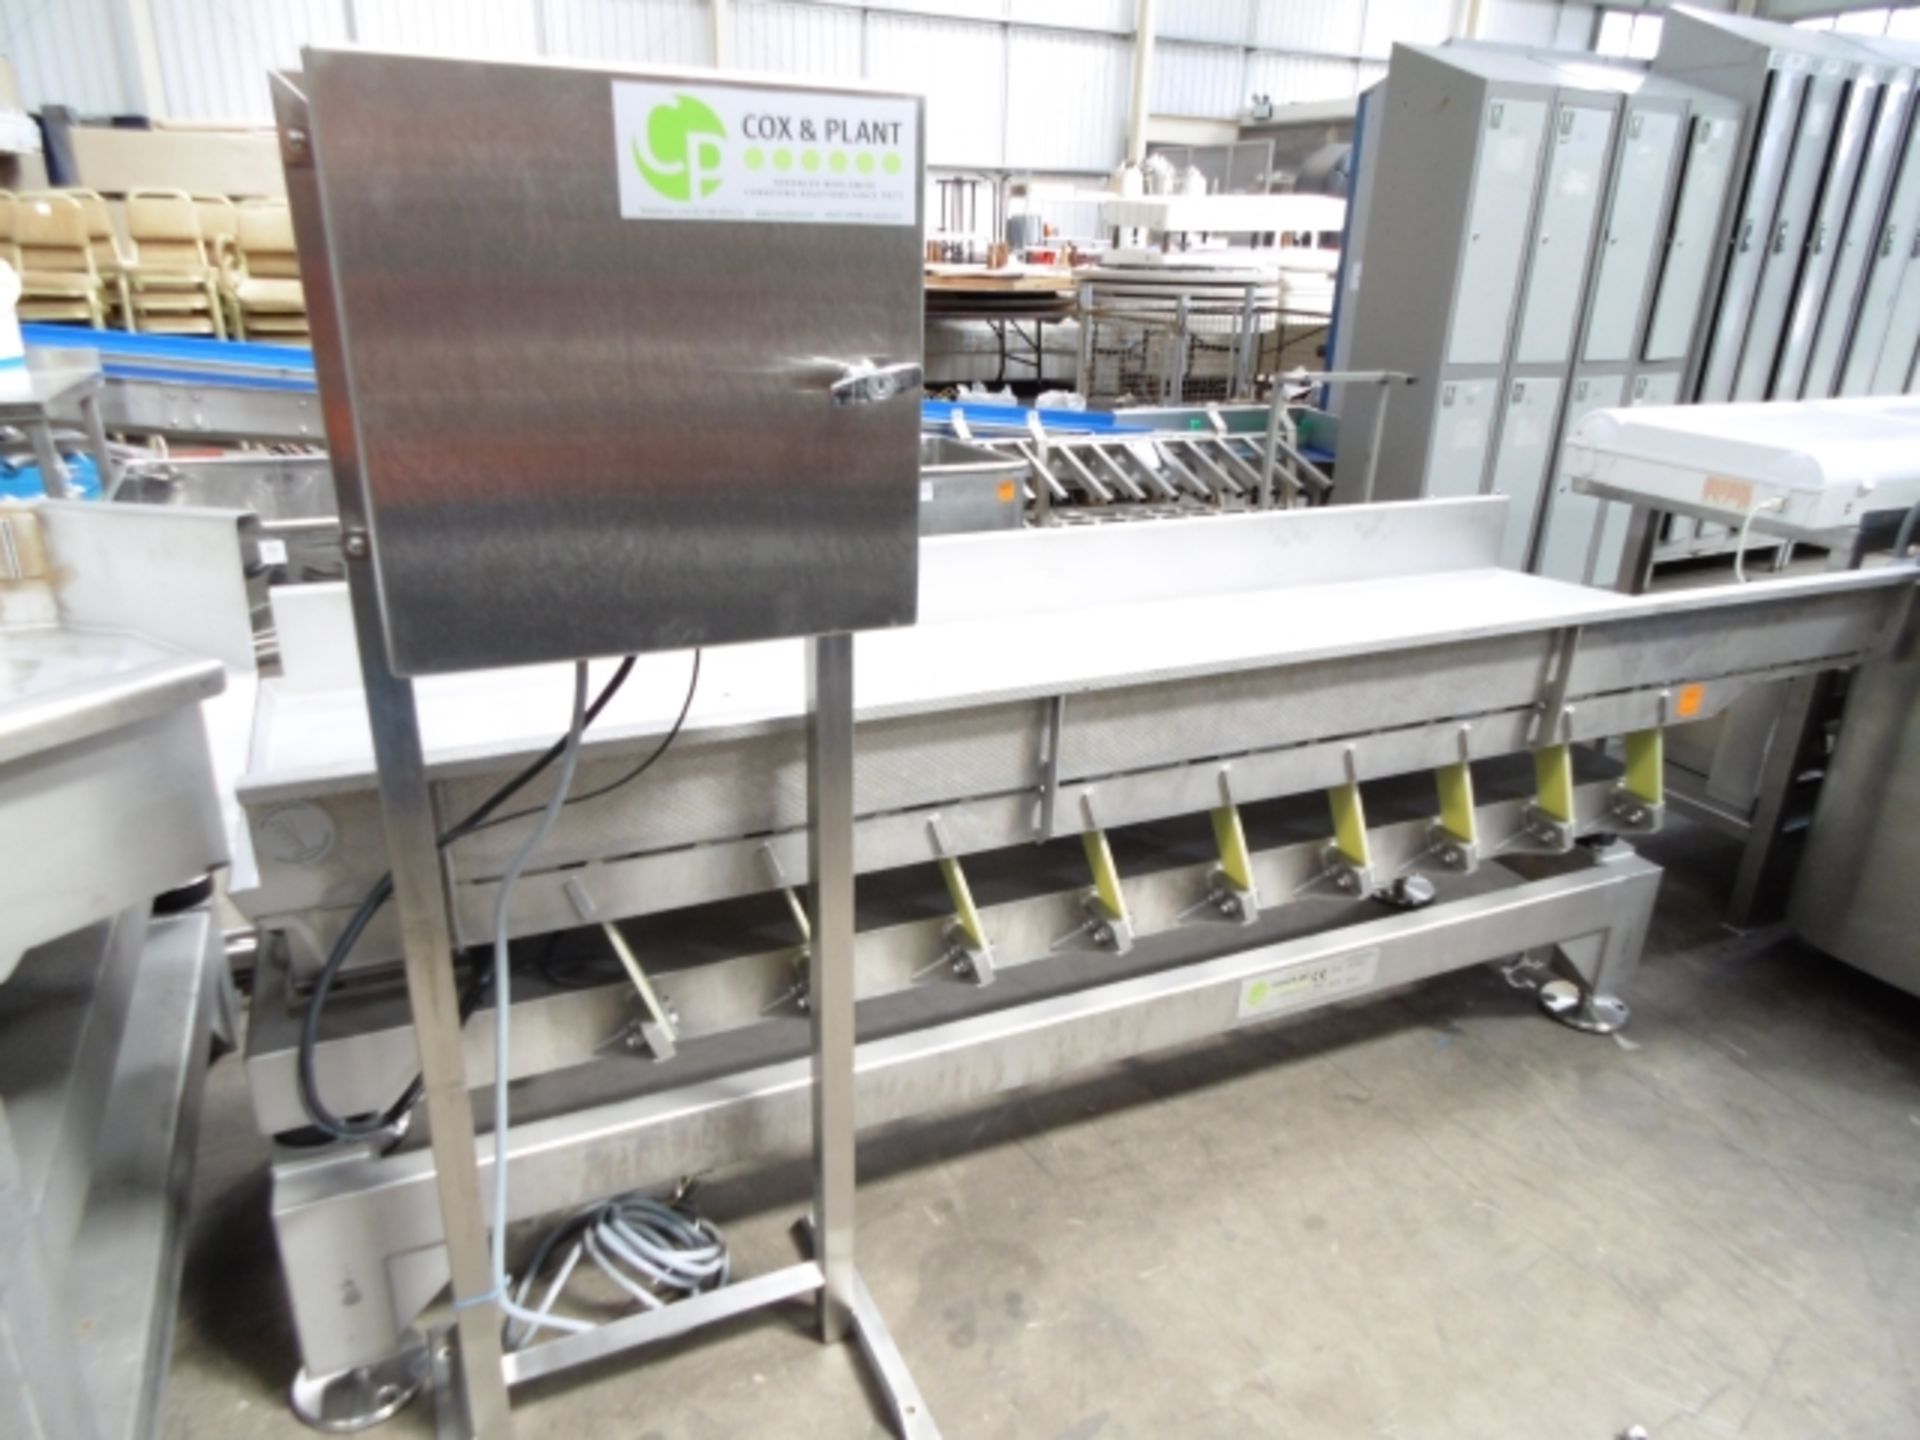 * 2013 Cox & Plant Stainless Steel Vibratory Hardening Conveyor; max amplitude 6 mm; width 620 mm; - Image 2 of 8